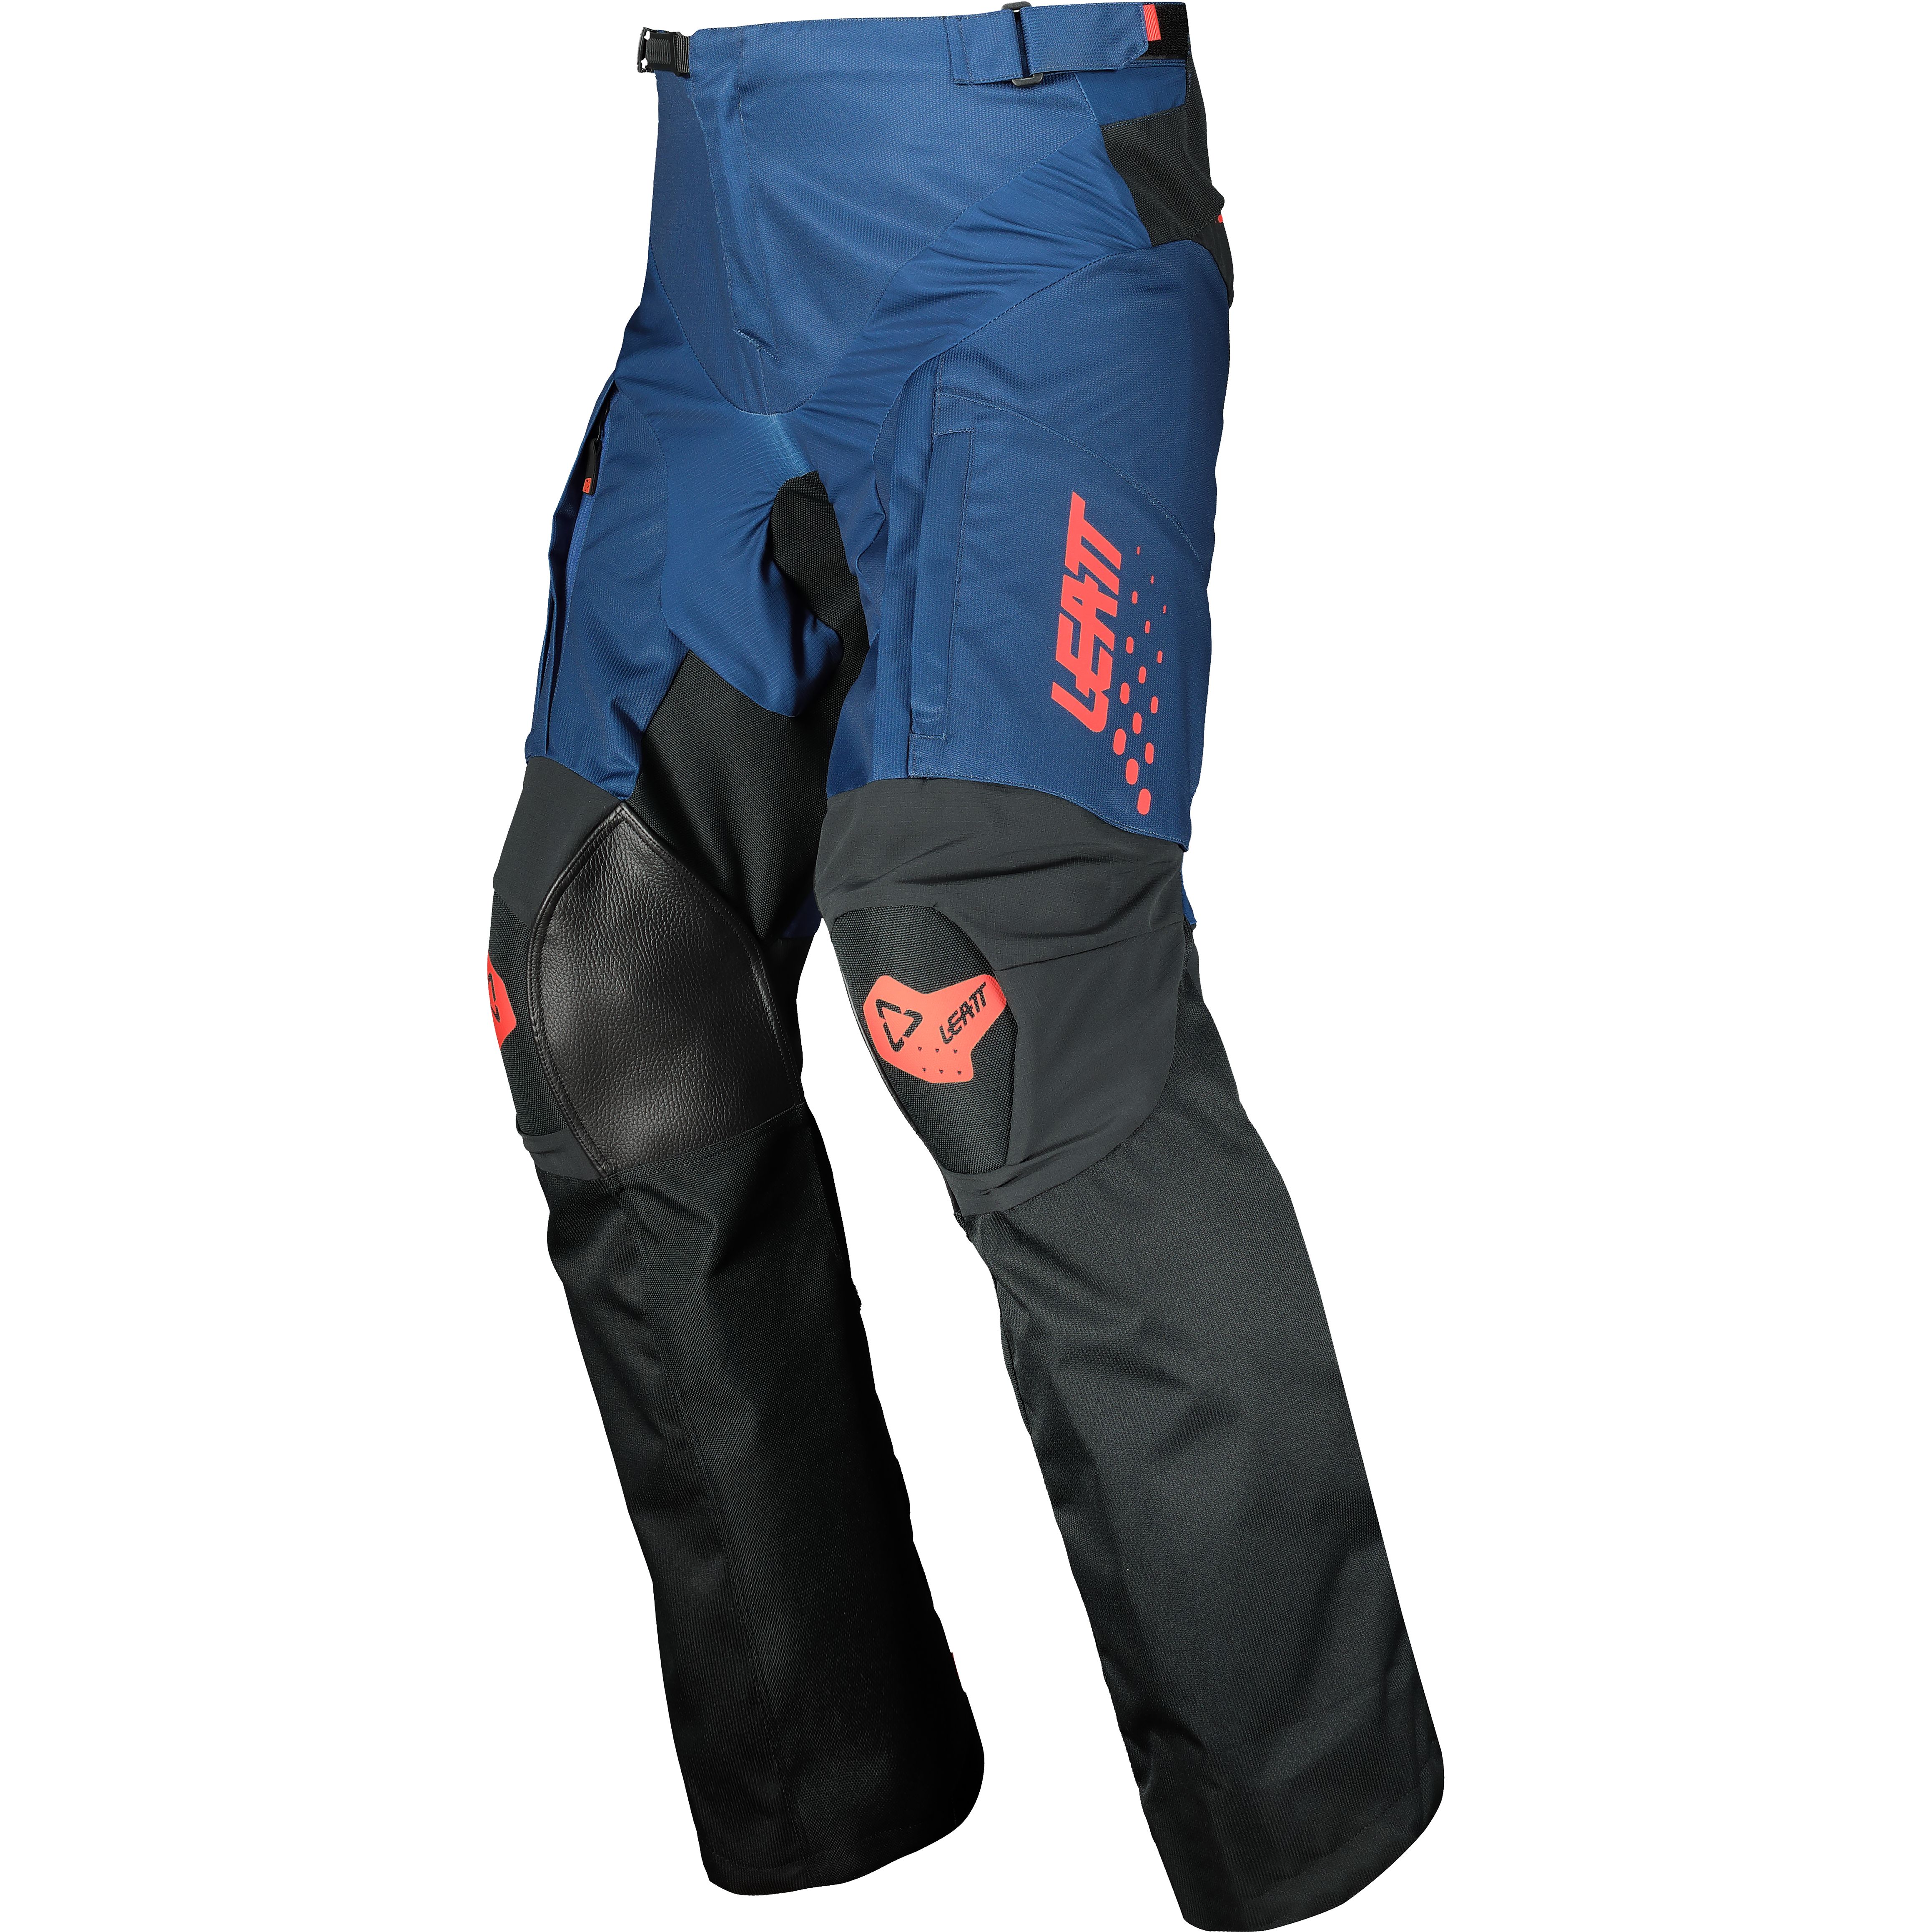 Viewing Images For Leatt 5.5 Enduro Pant :: MotorcycleGear.com